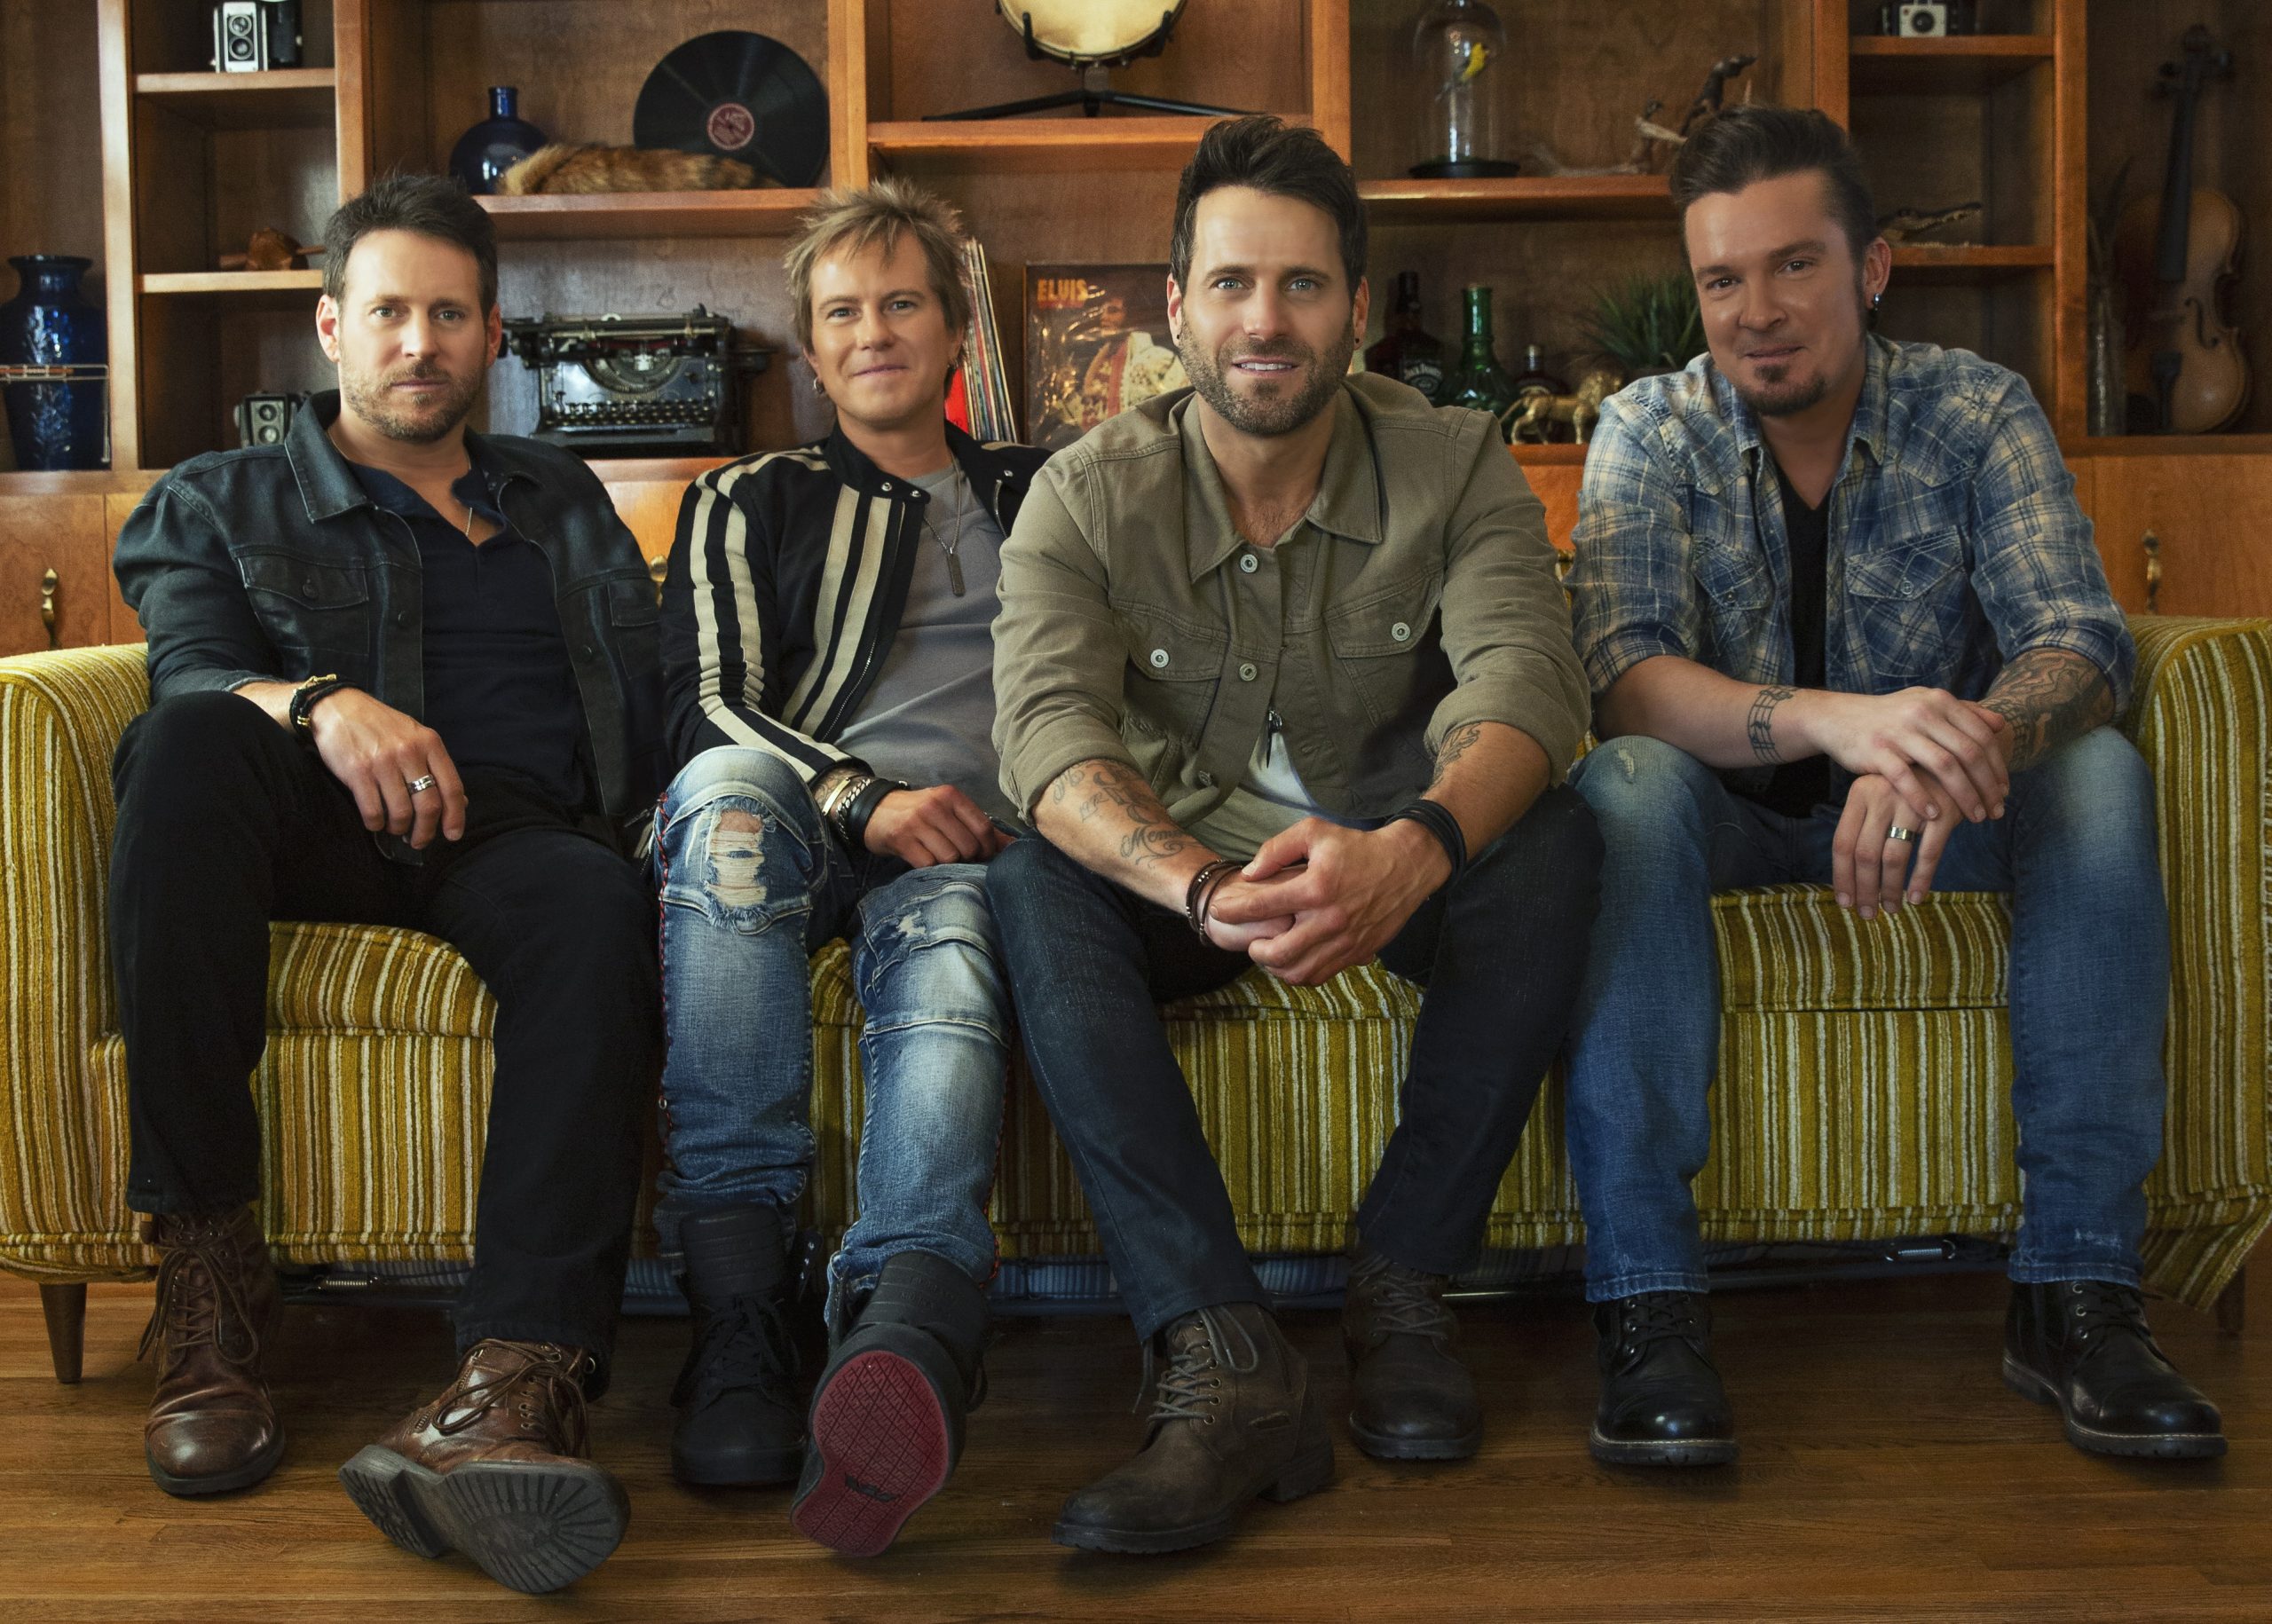 Parmalee Related to New Song, 'Be Alright,' After First Listen Sounds